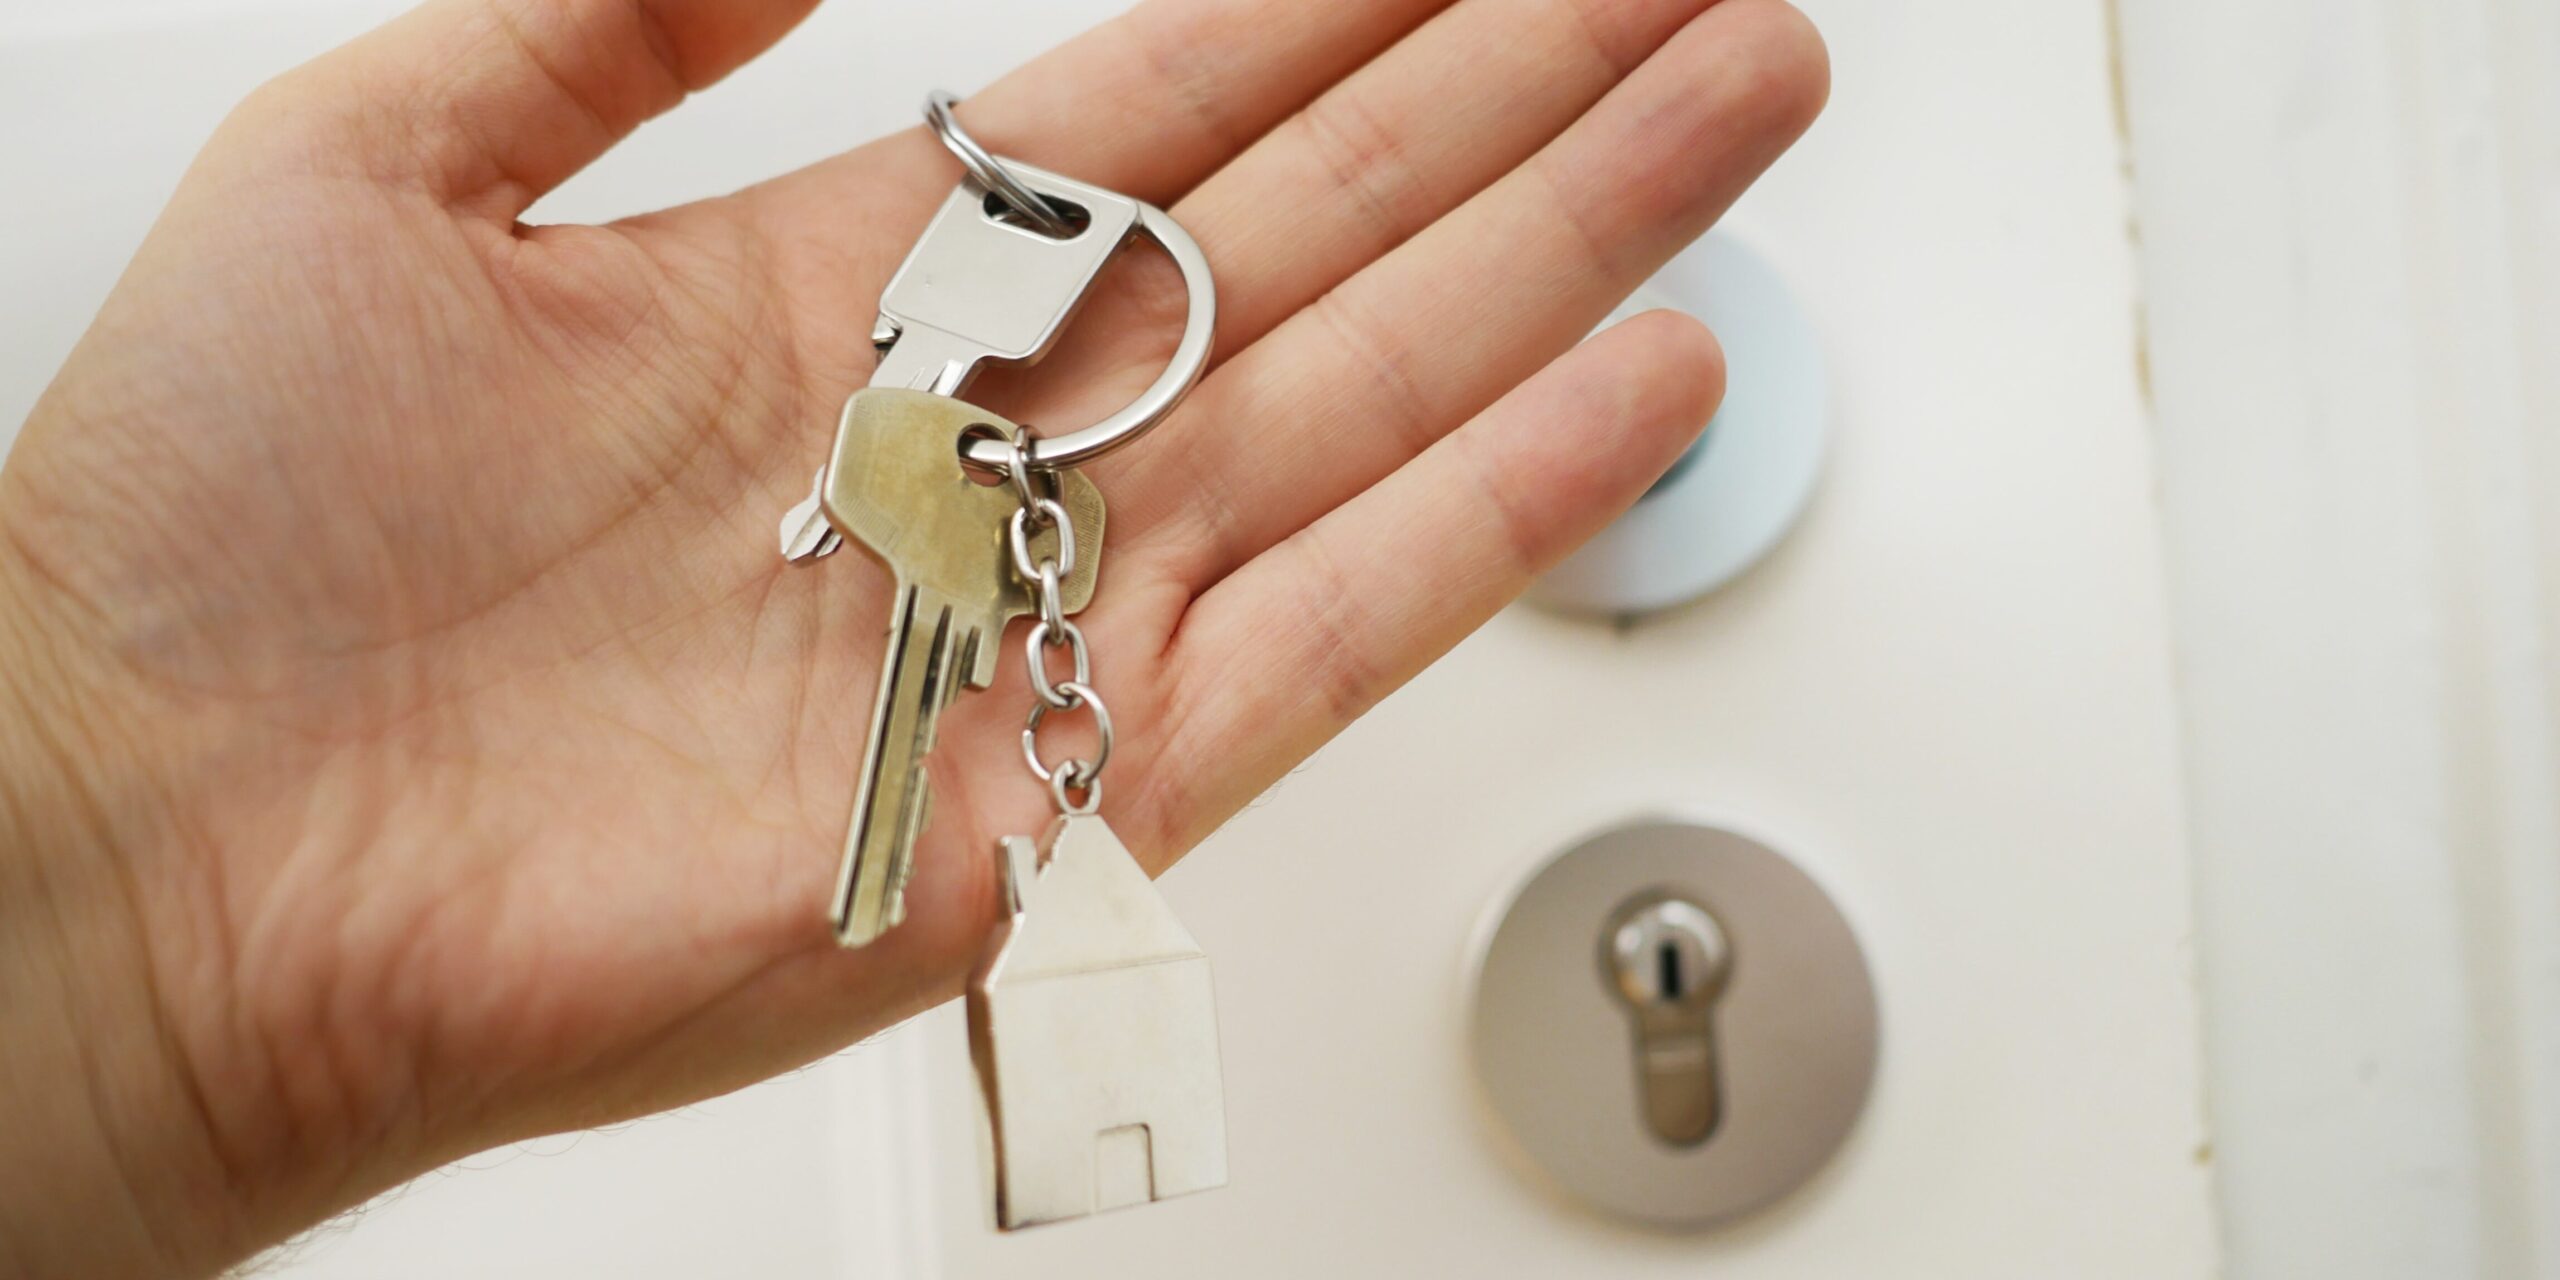 Cash for Keys: What Landlords Need to Know